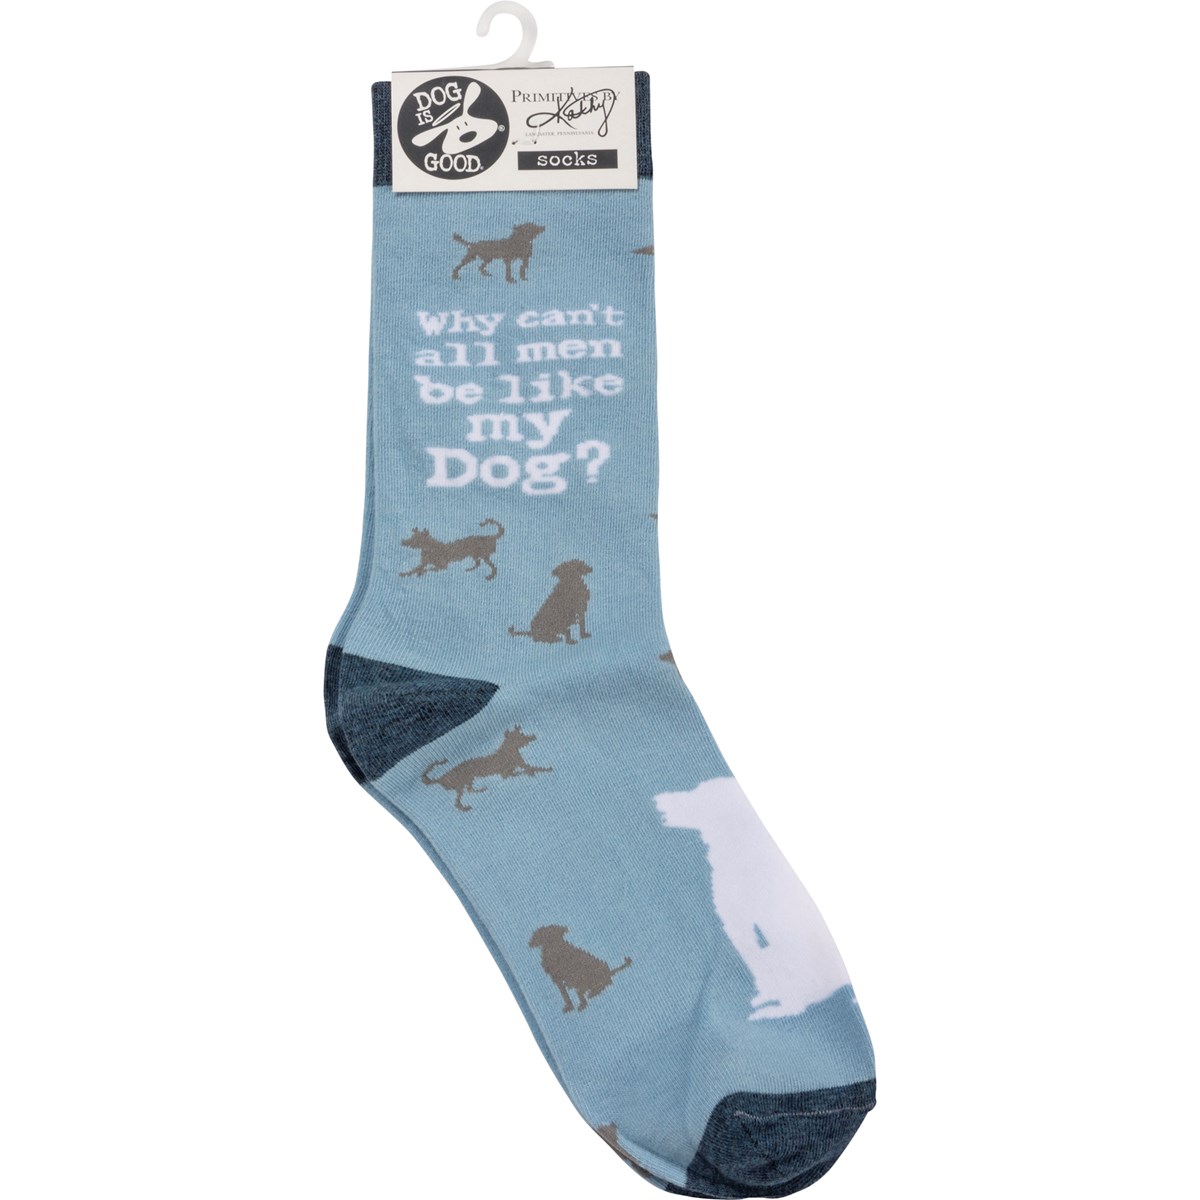 Socks - Why Can't All Men Be Like My Dog - One Size Fits Most - Cotton, Nylon, Spandex